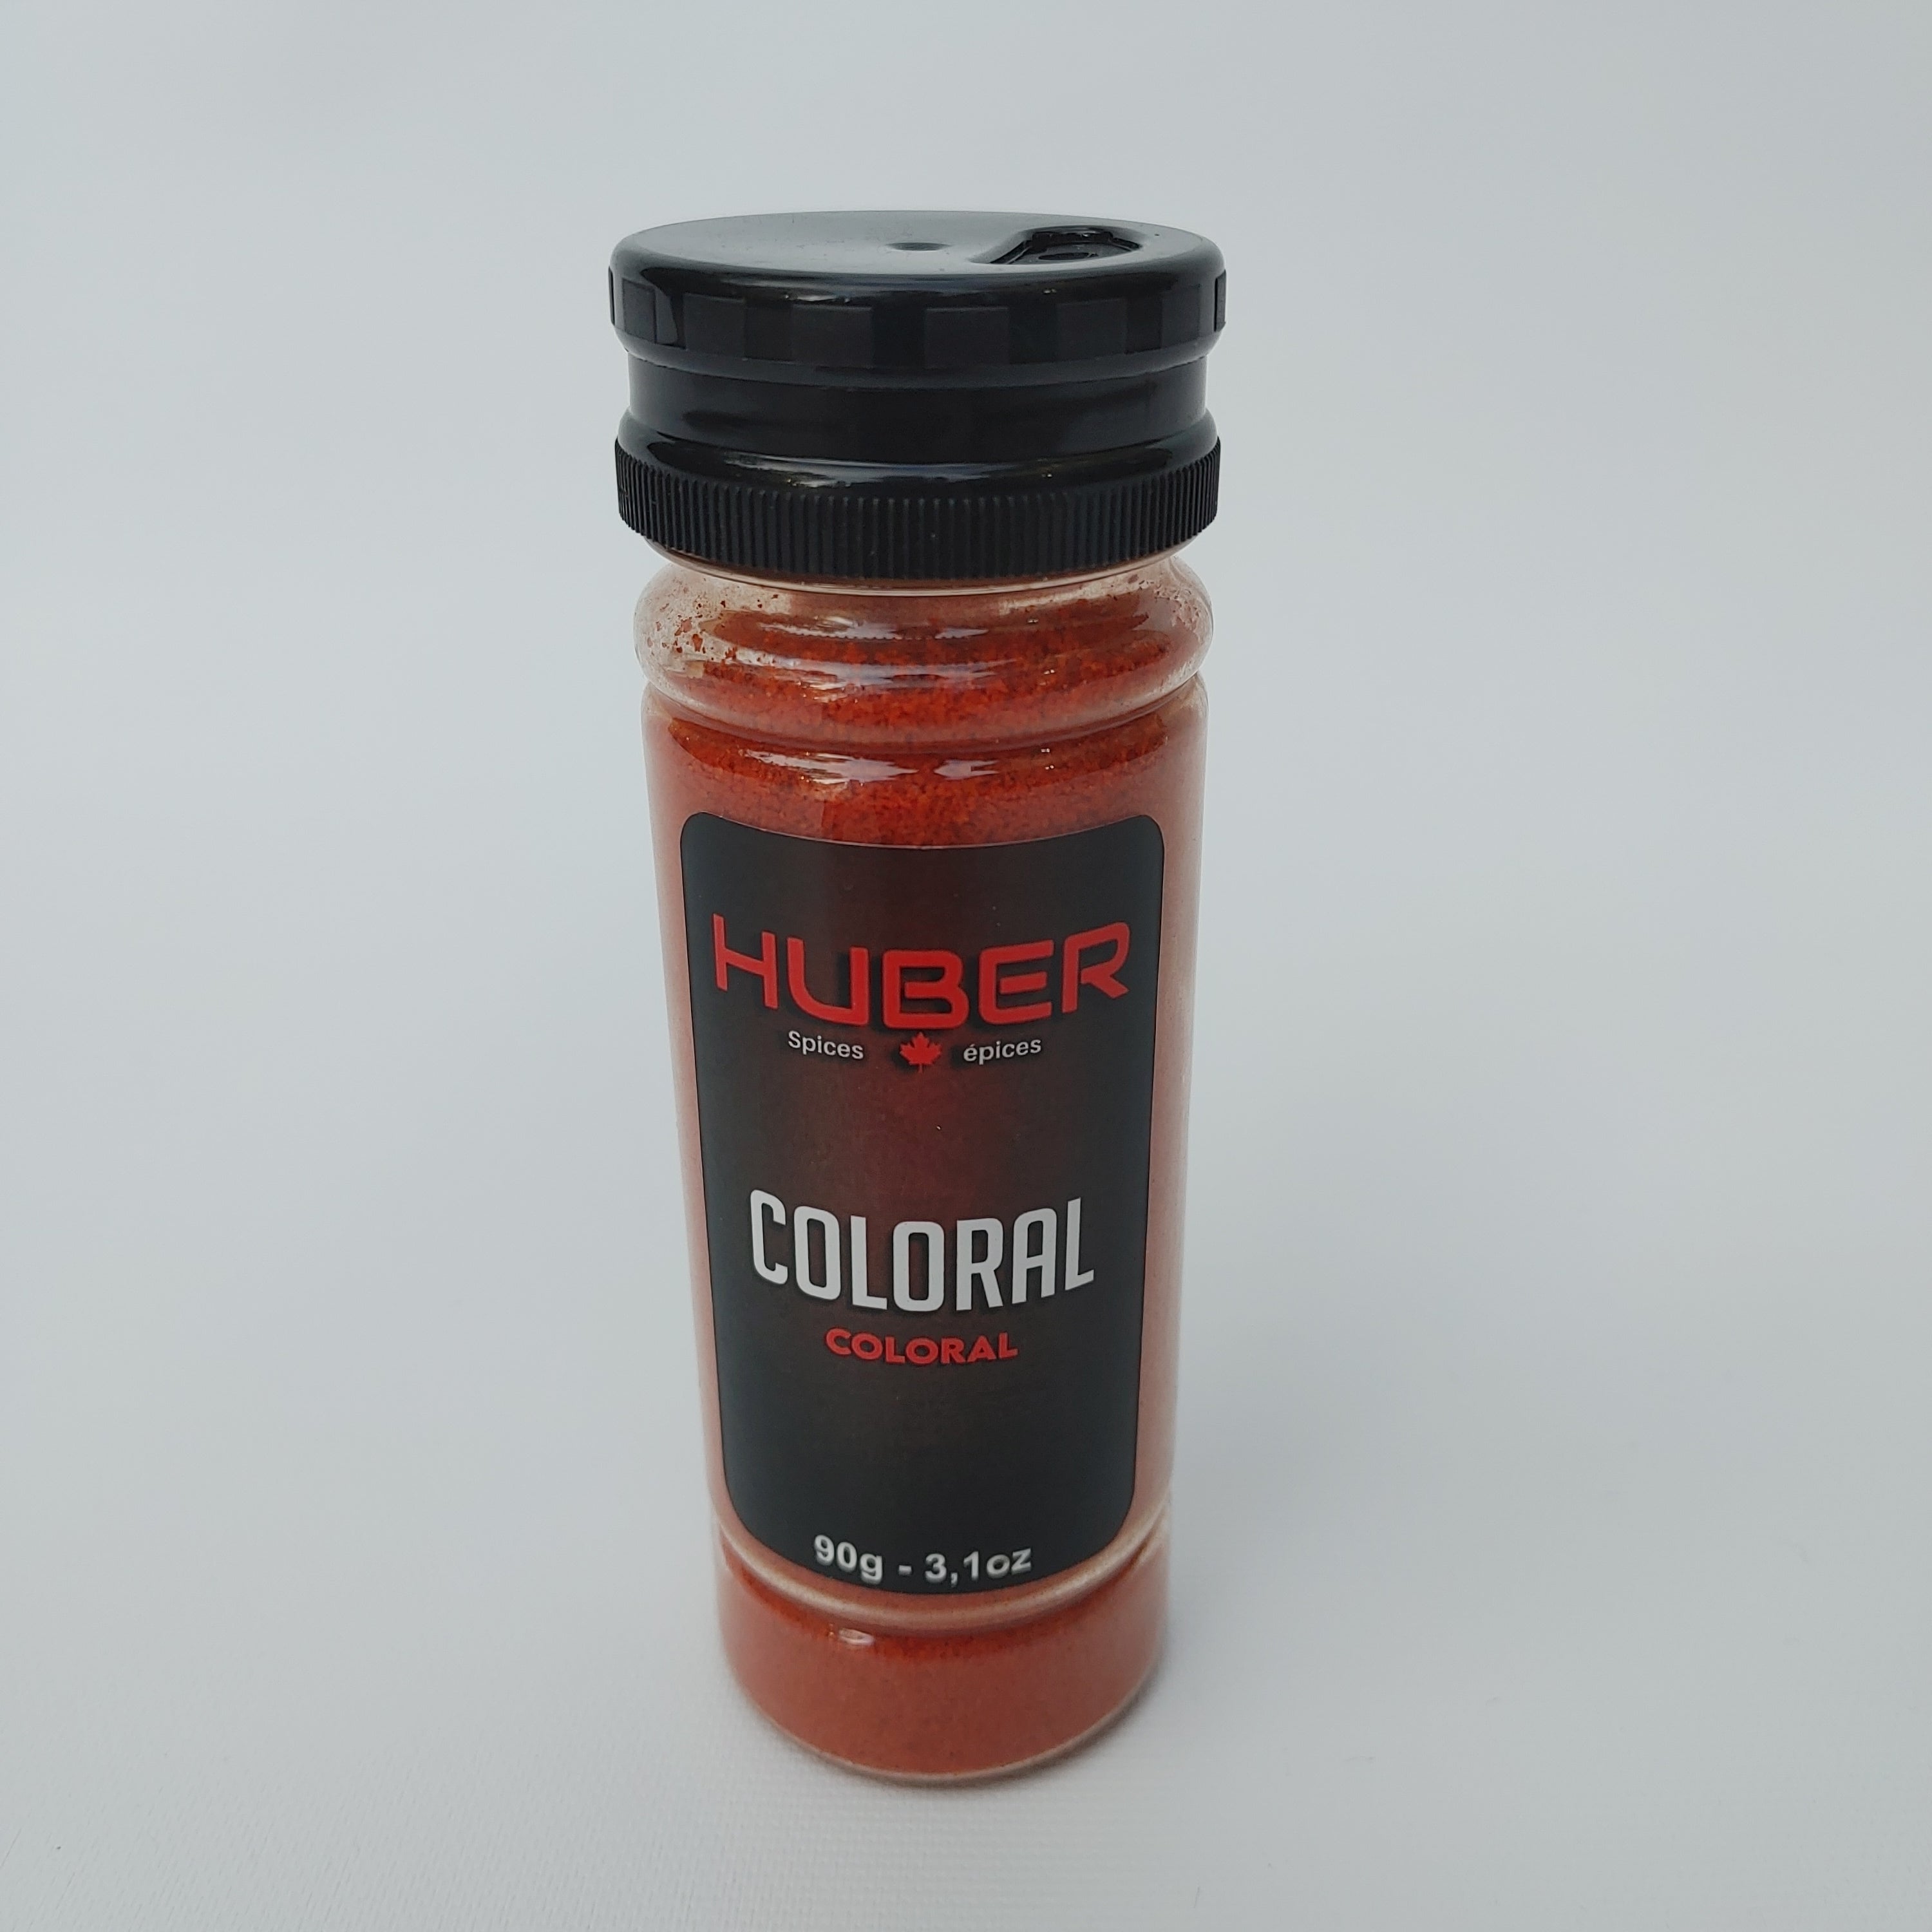 HUBER - Coloral